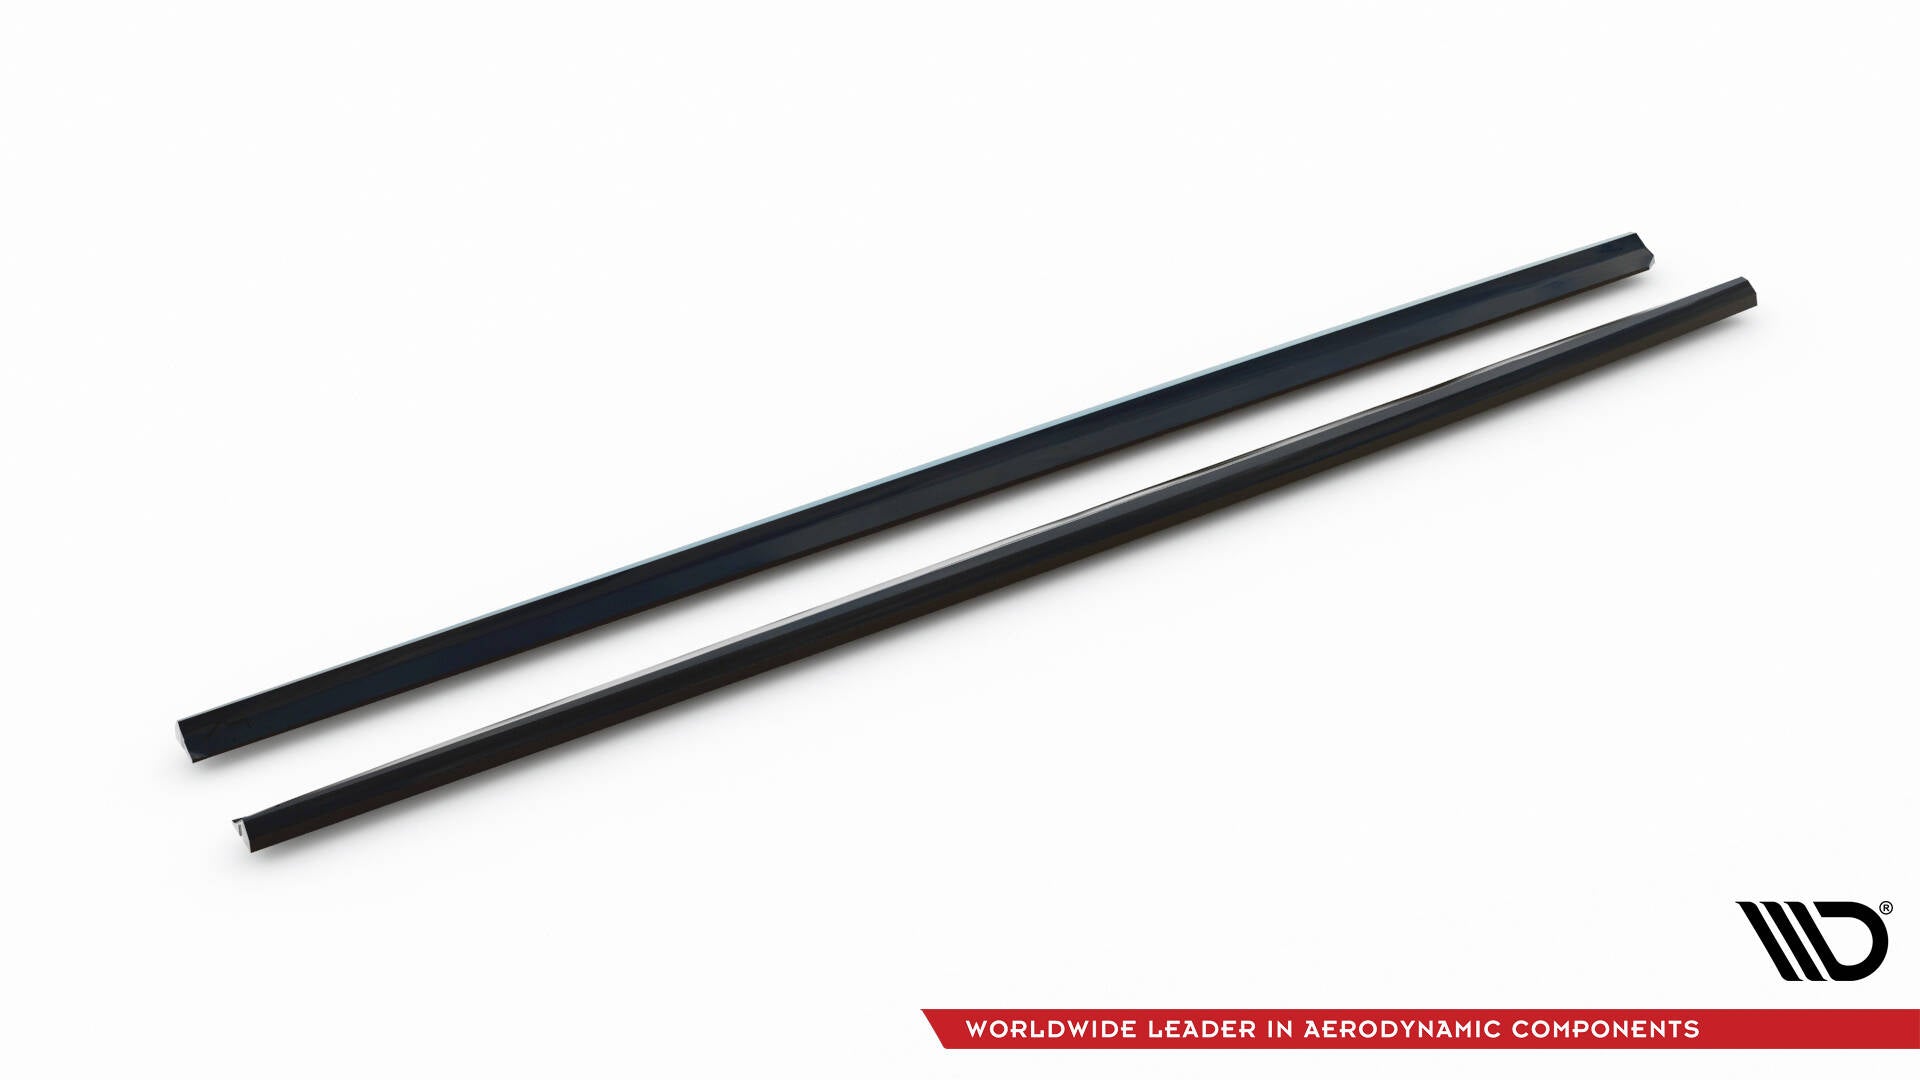 Side Skirts Diffusers Volkswagen Polo GTI Mk6 Facelift